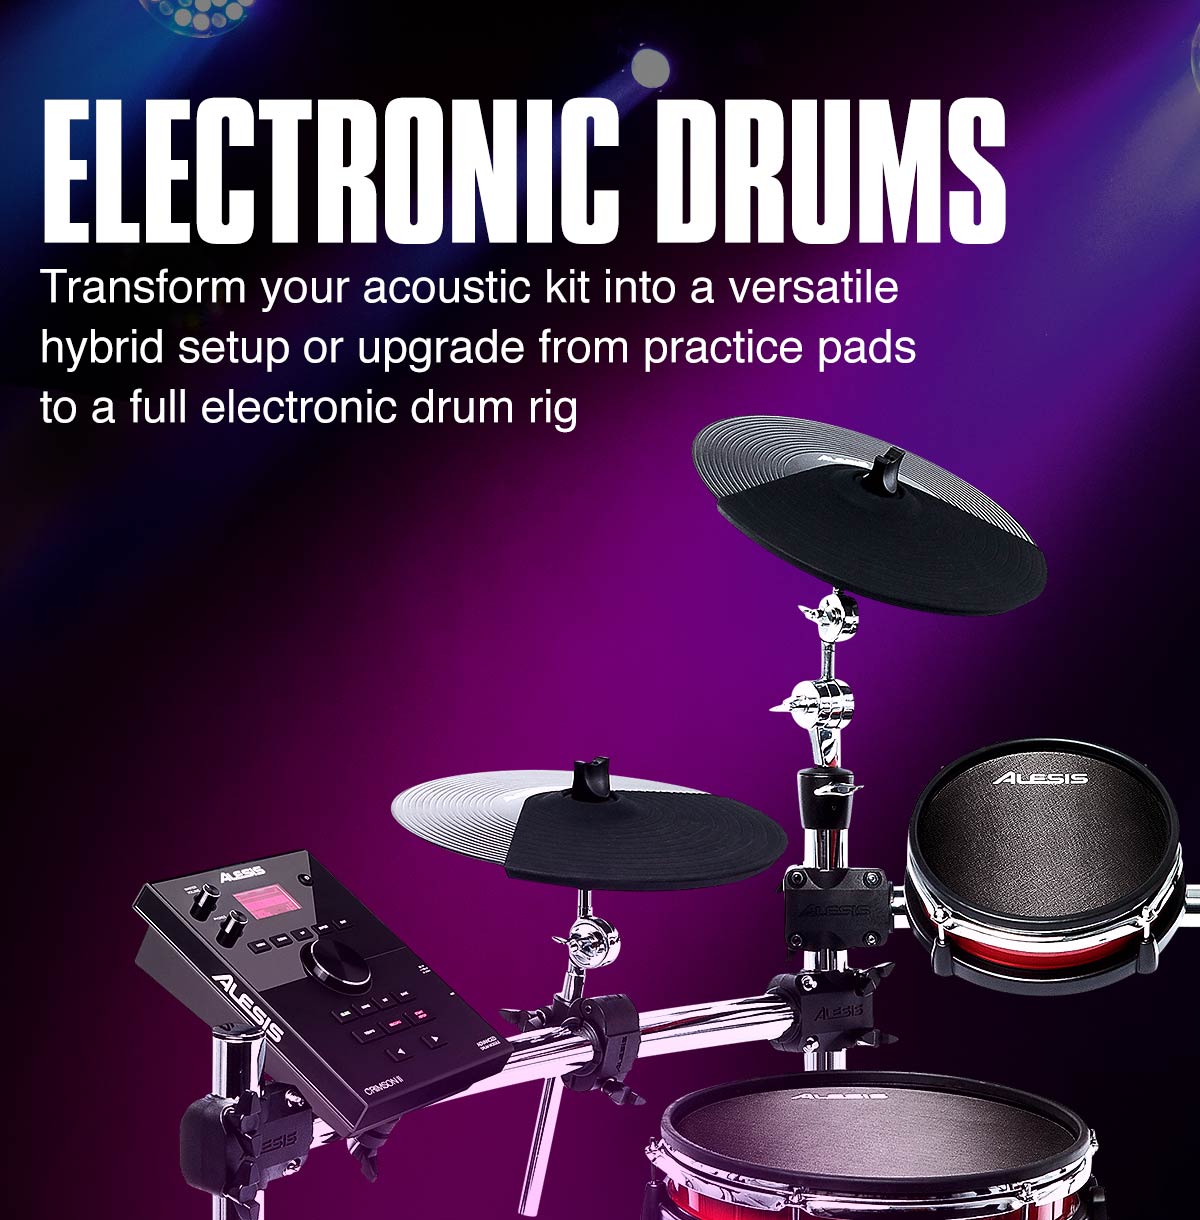 Electronic drums. transform your acoustic kit into a versatile hybrid setup or upgrade from practice pads to a full electronic drum rig.